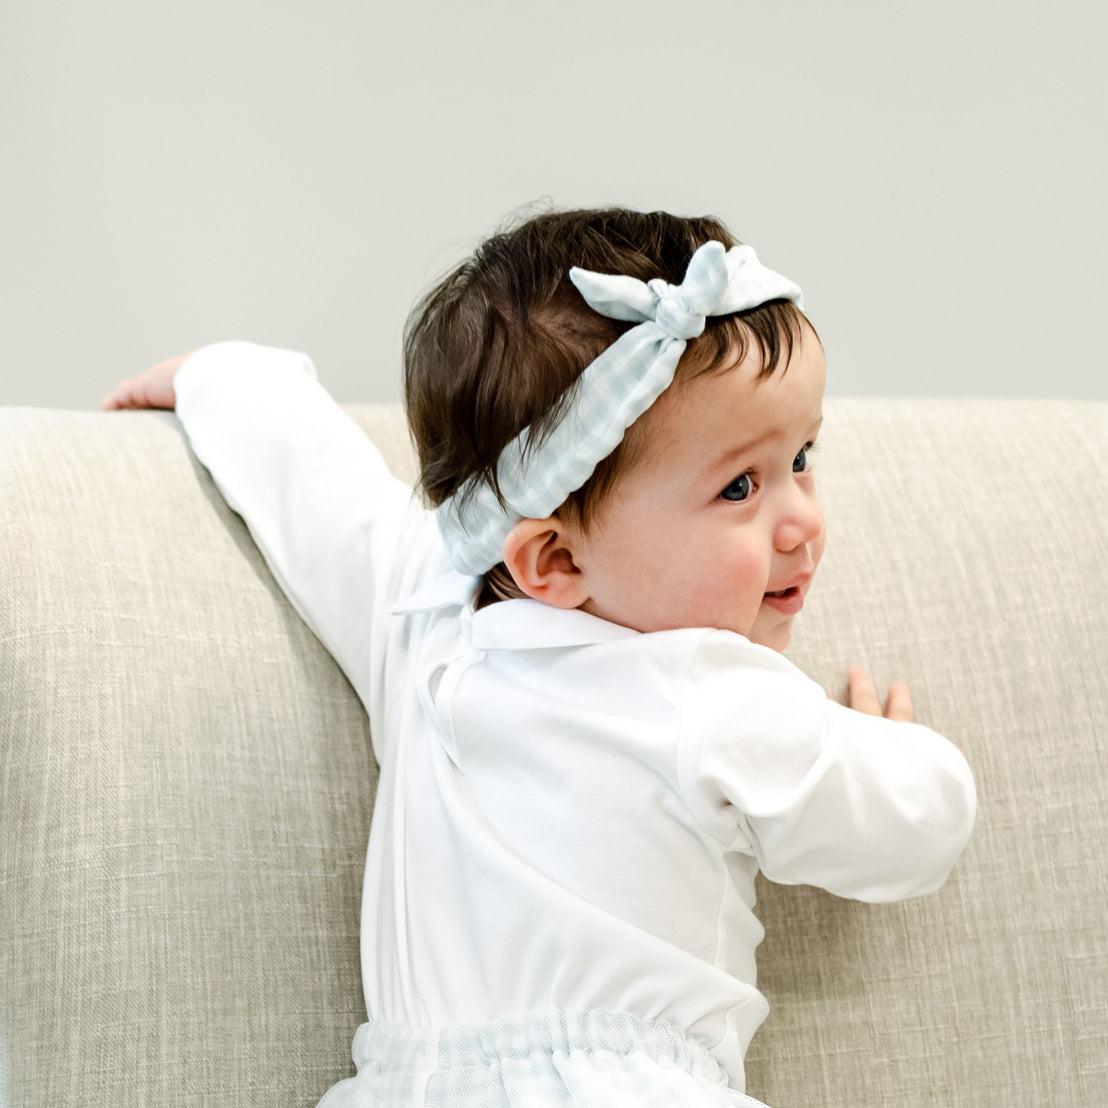 A newborn with dark hair wearing the Isla Tie Headband and white outfit looks over her shoulder, smiling, while lying on a beige sofa.